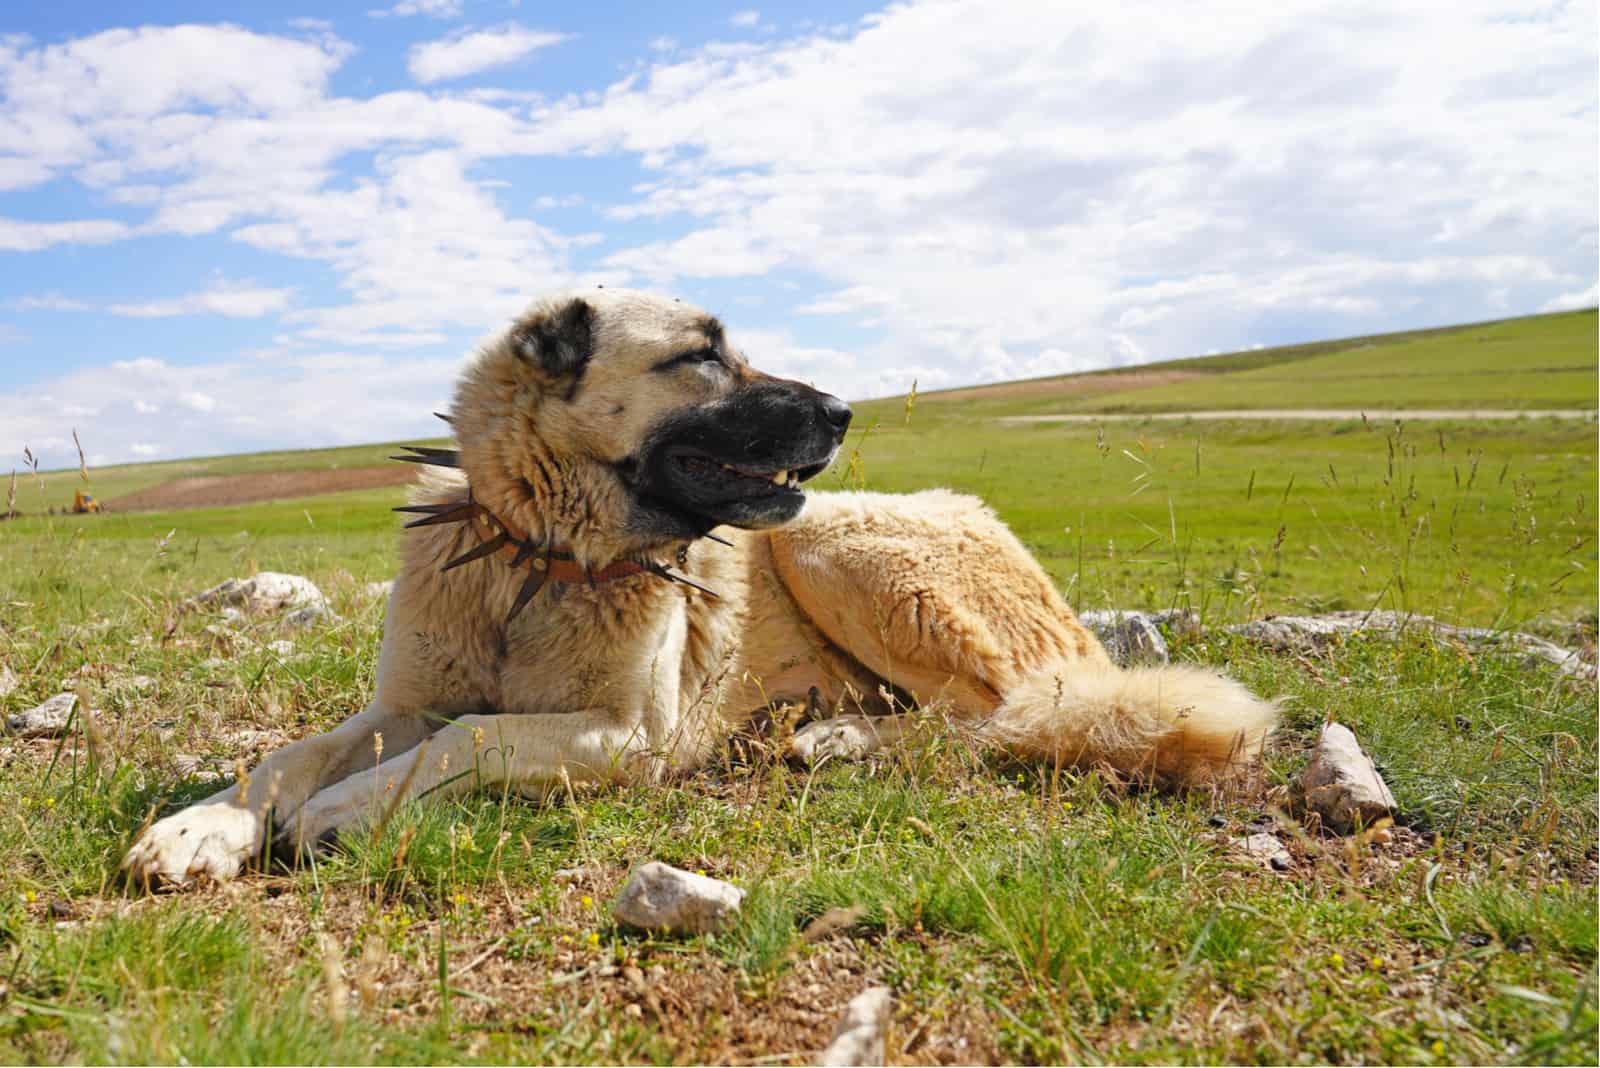 anatolian shepherd with a spiked collar